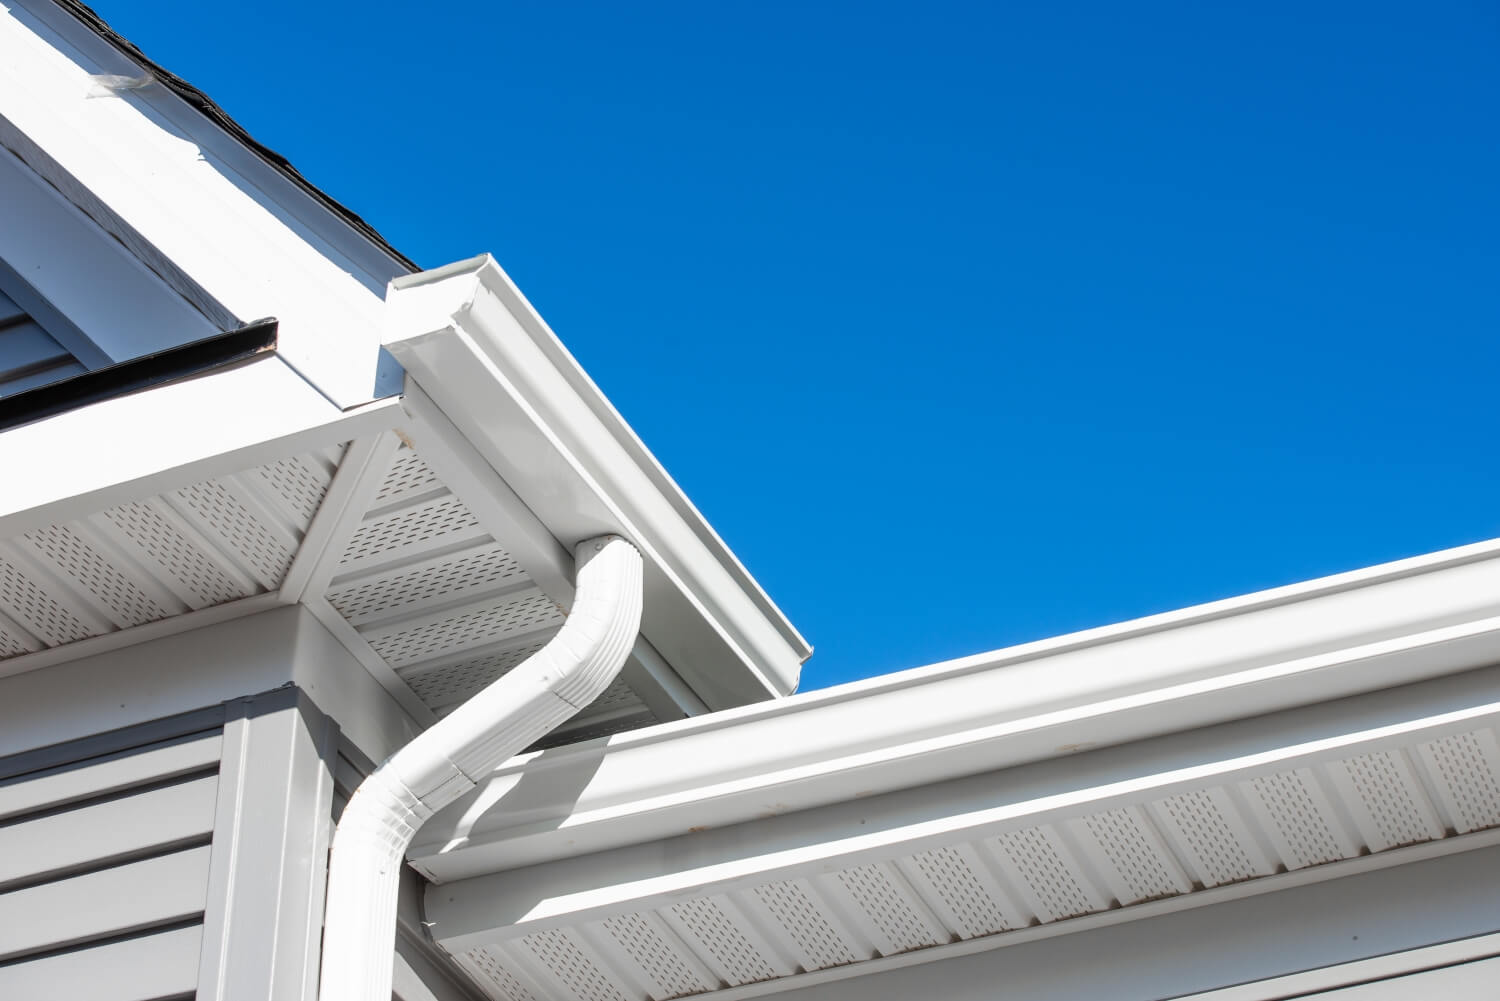 Guttering Repair & Replacement Services in Esher, Cobham and Guildford